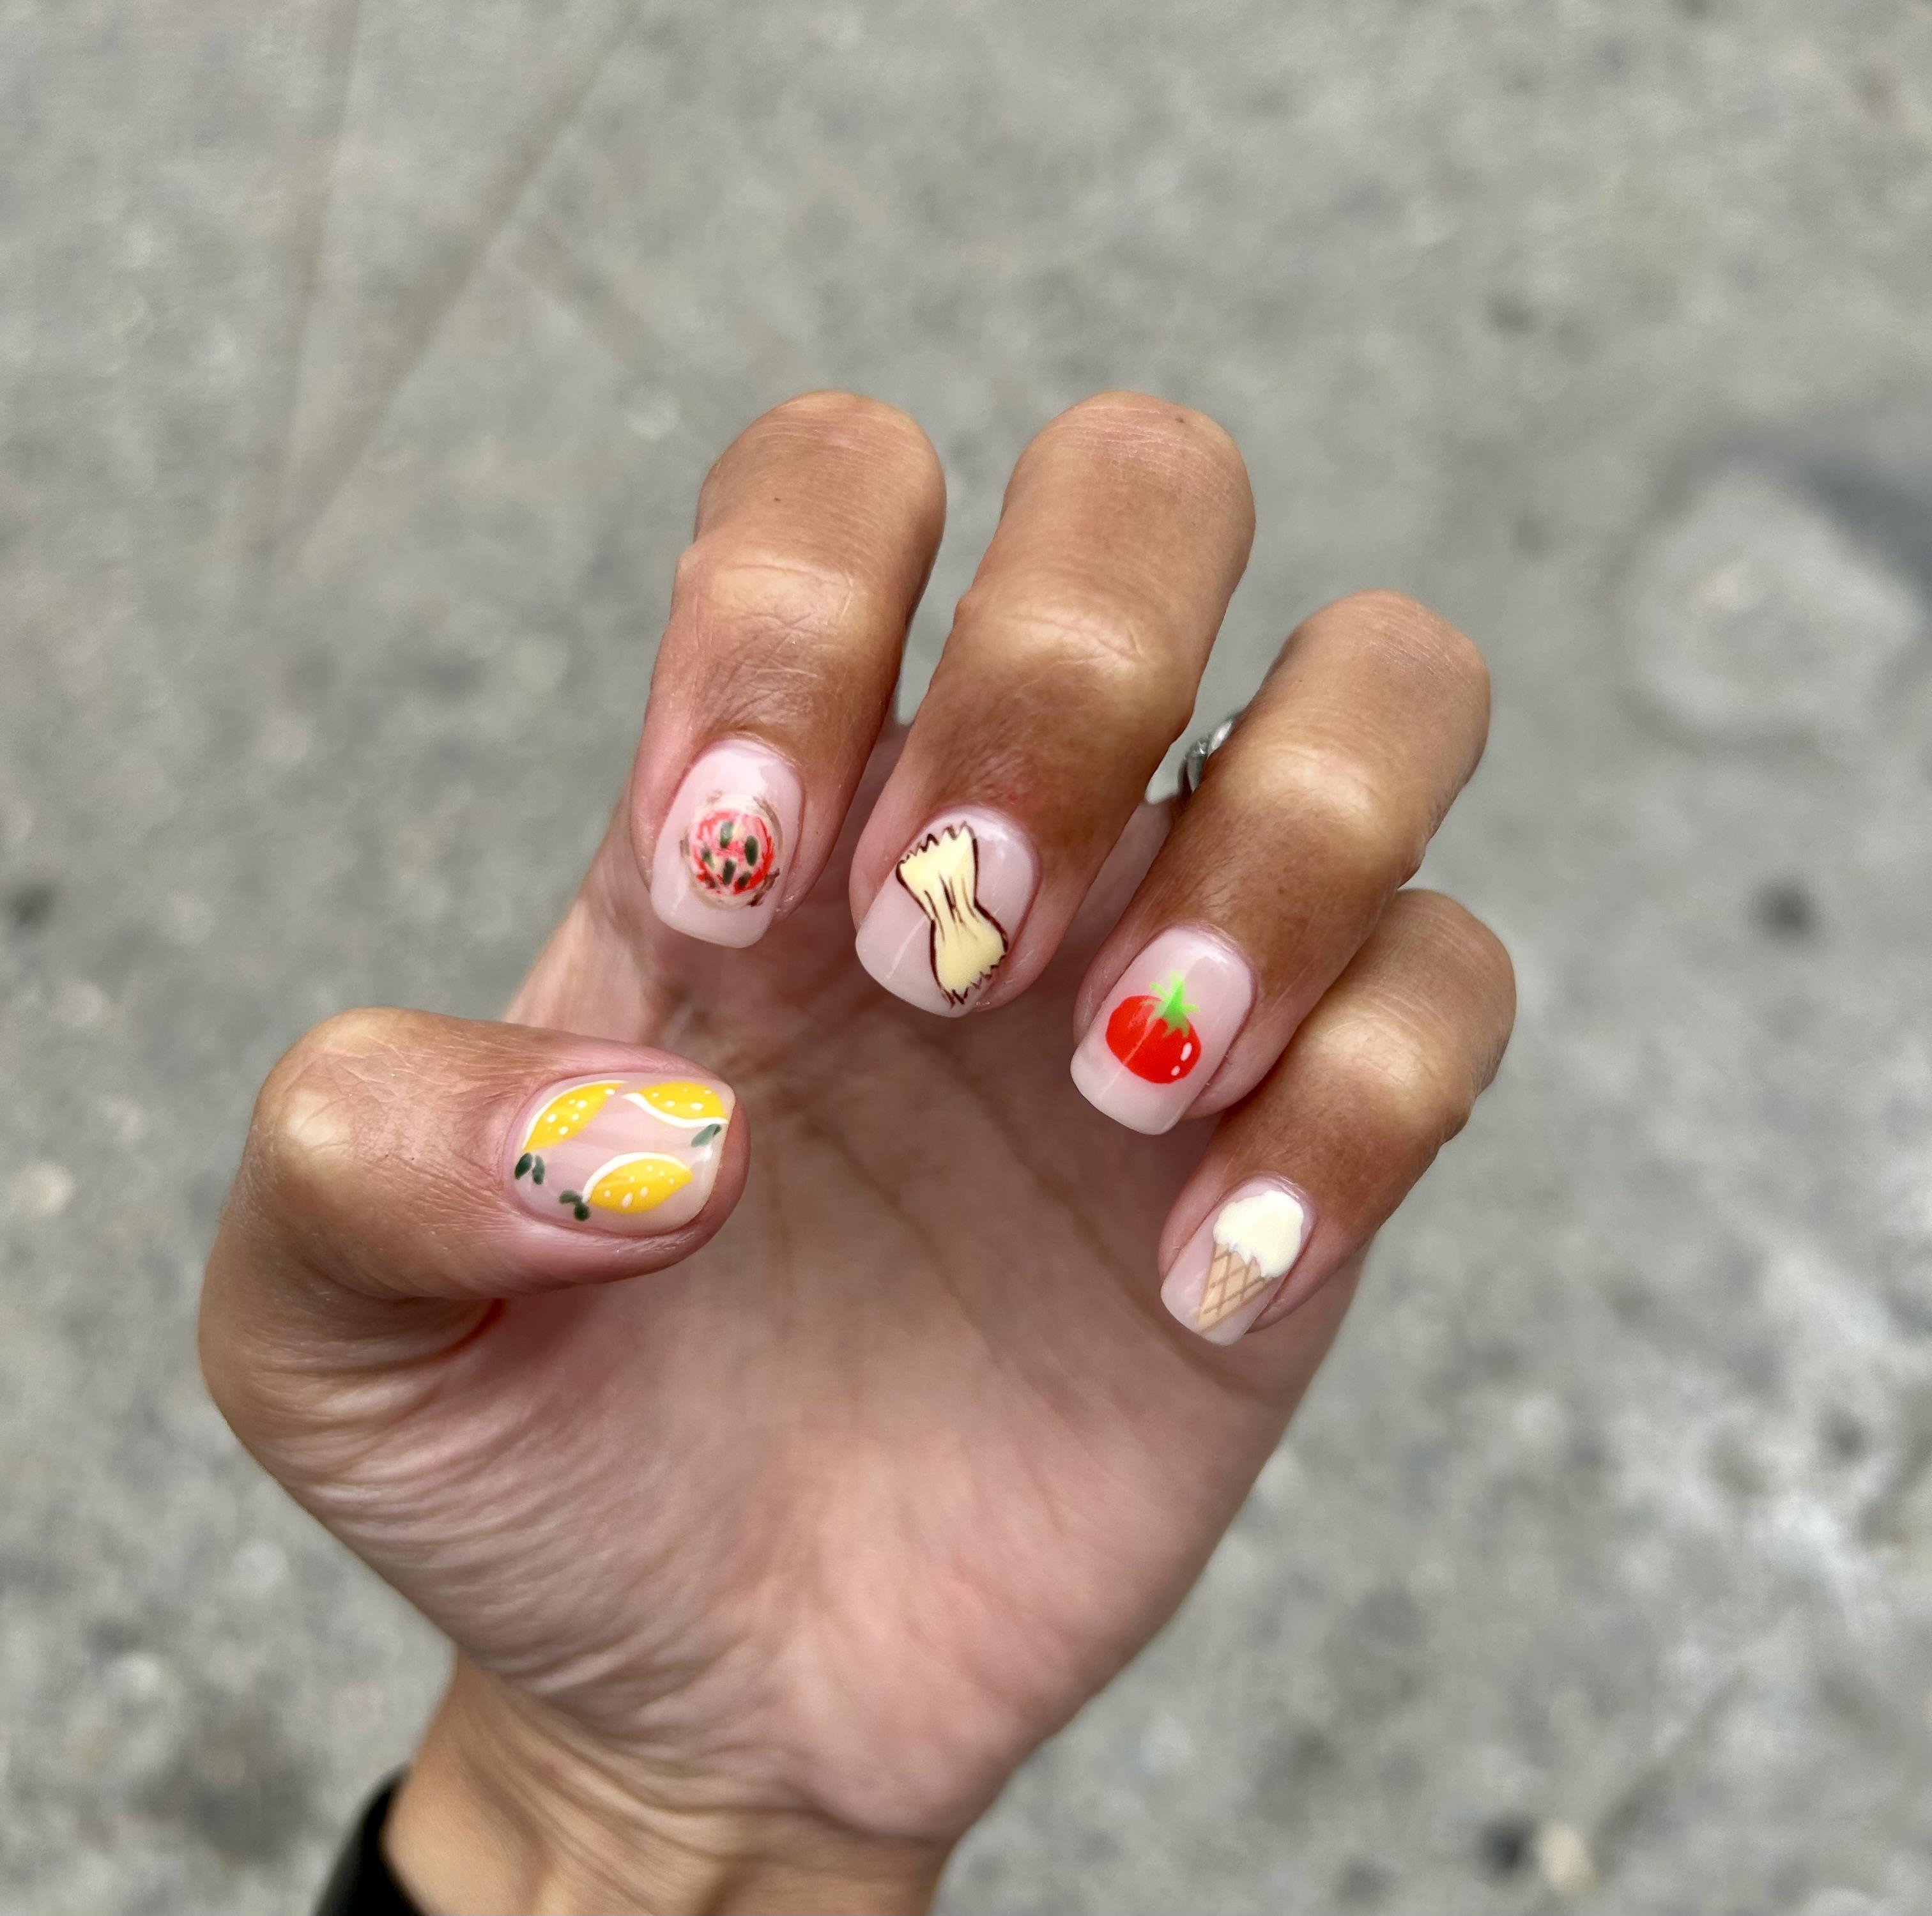 Princess Forman on X: Louis Vuitton nails. I was in love with